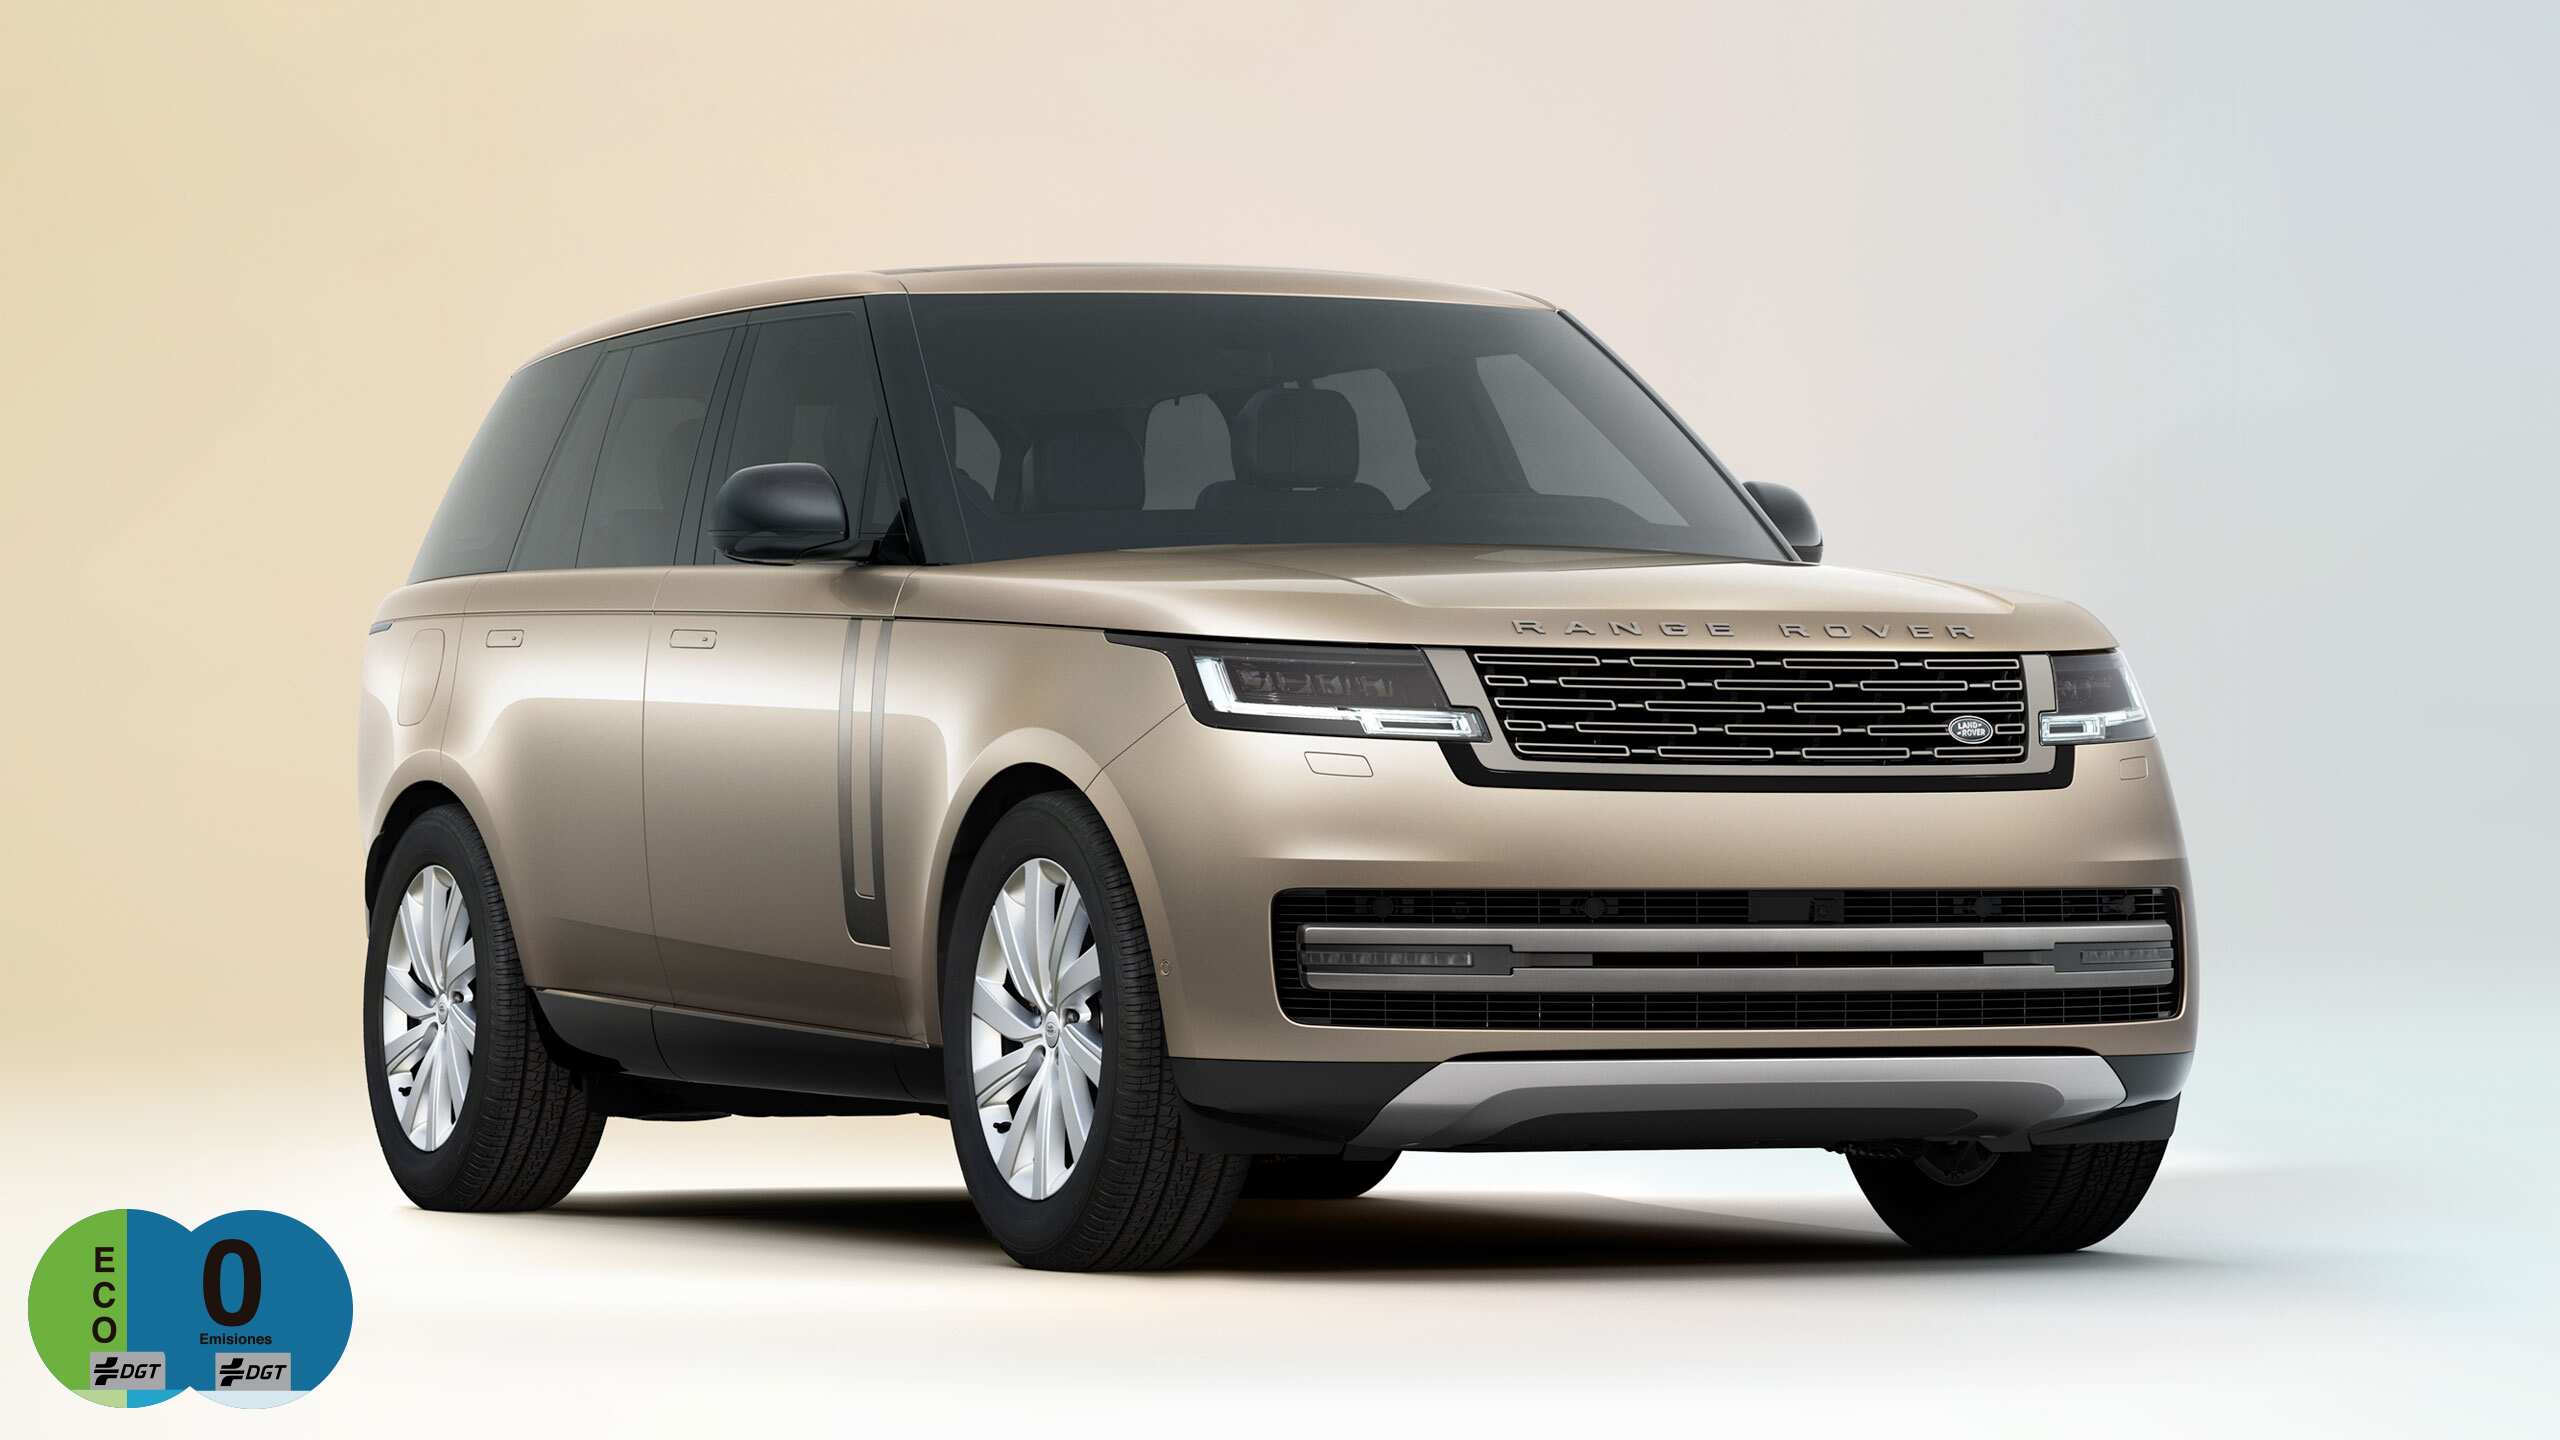 Front Right Profile representation of New Range Rover on gradient background